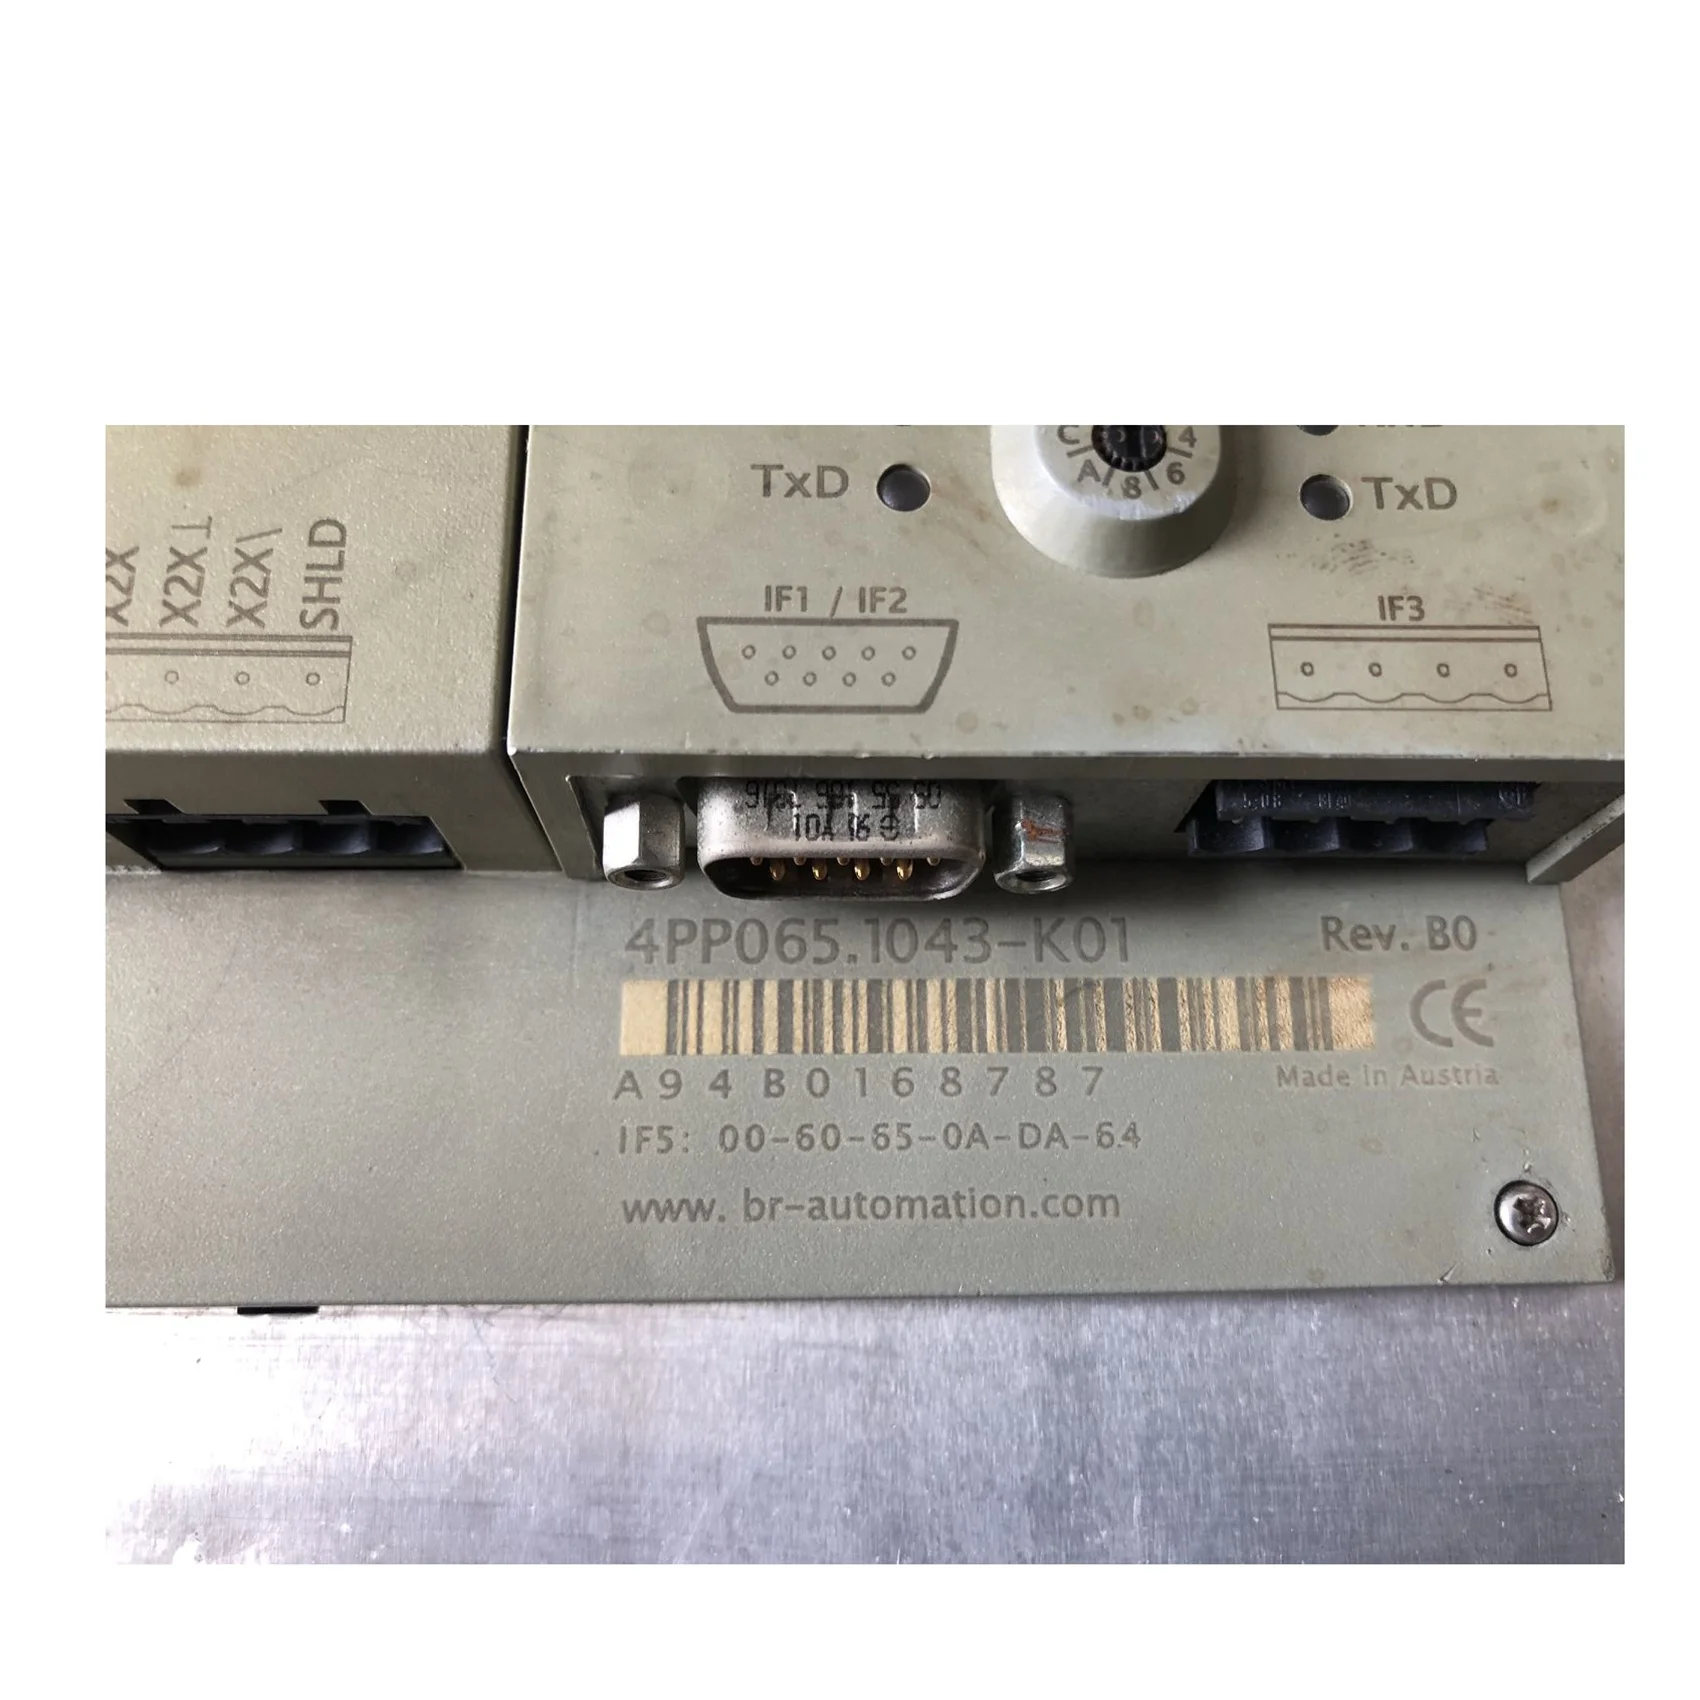 4PP065.0571-K74 - Industrial PC (B&R Automation) - iAutomation